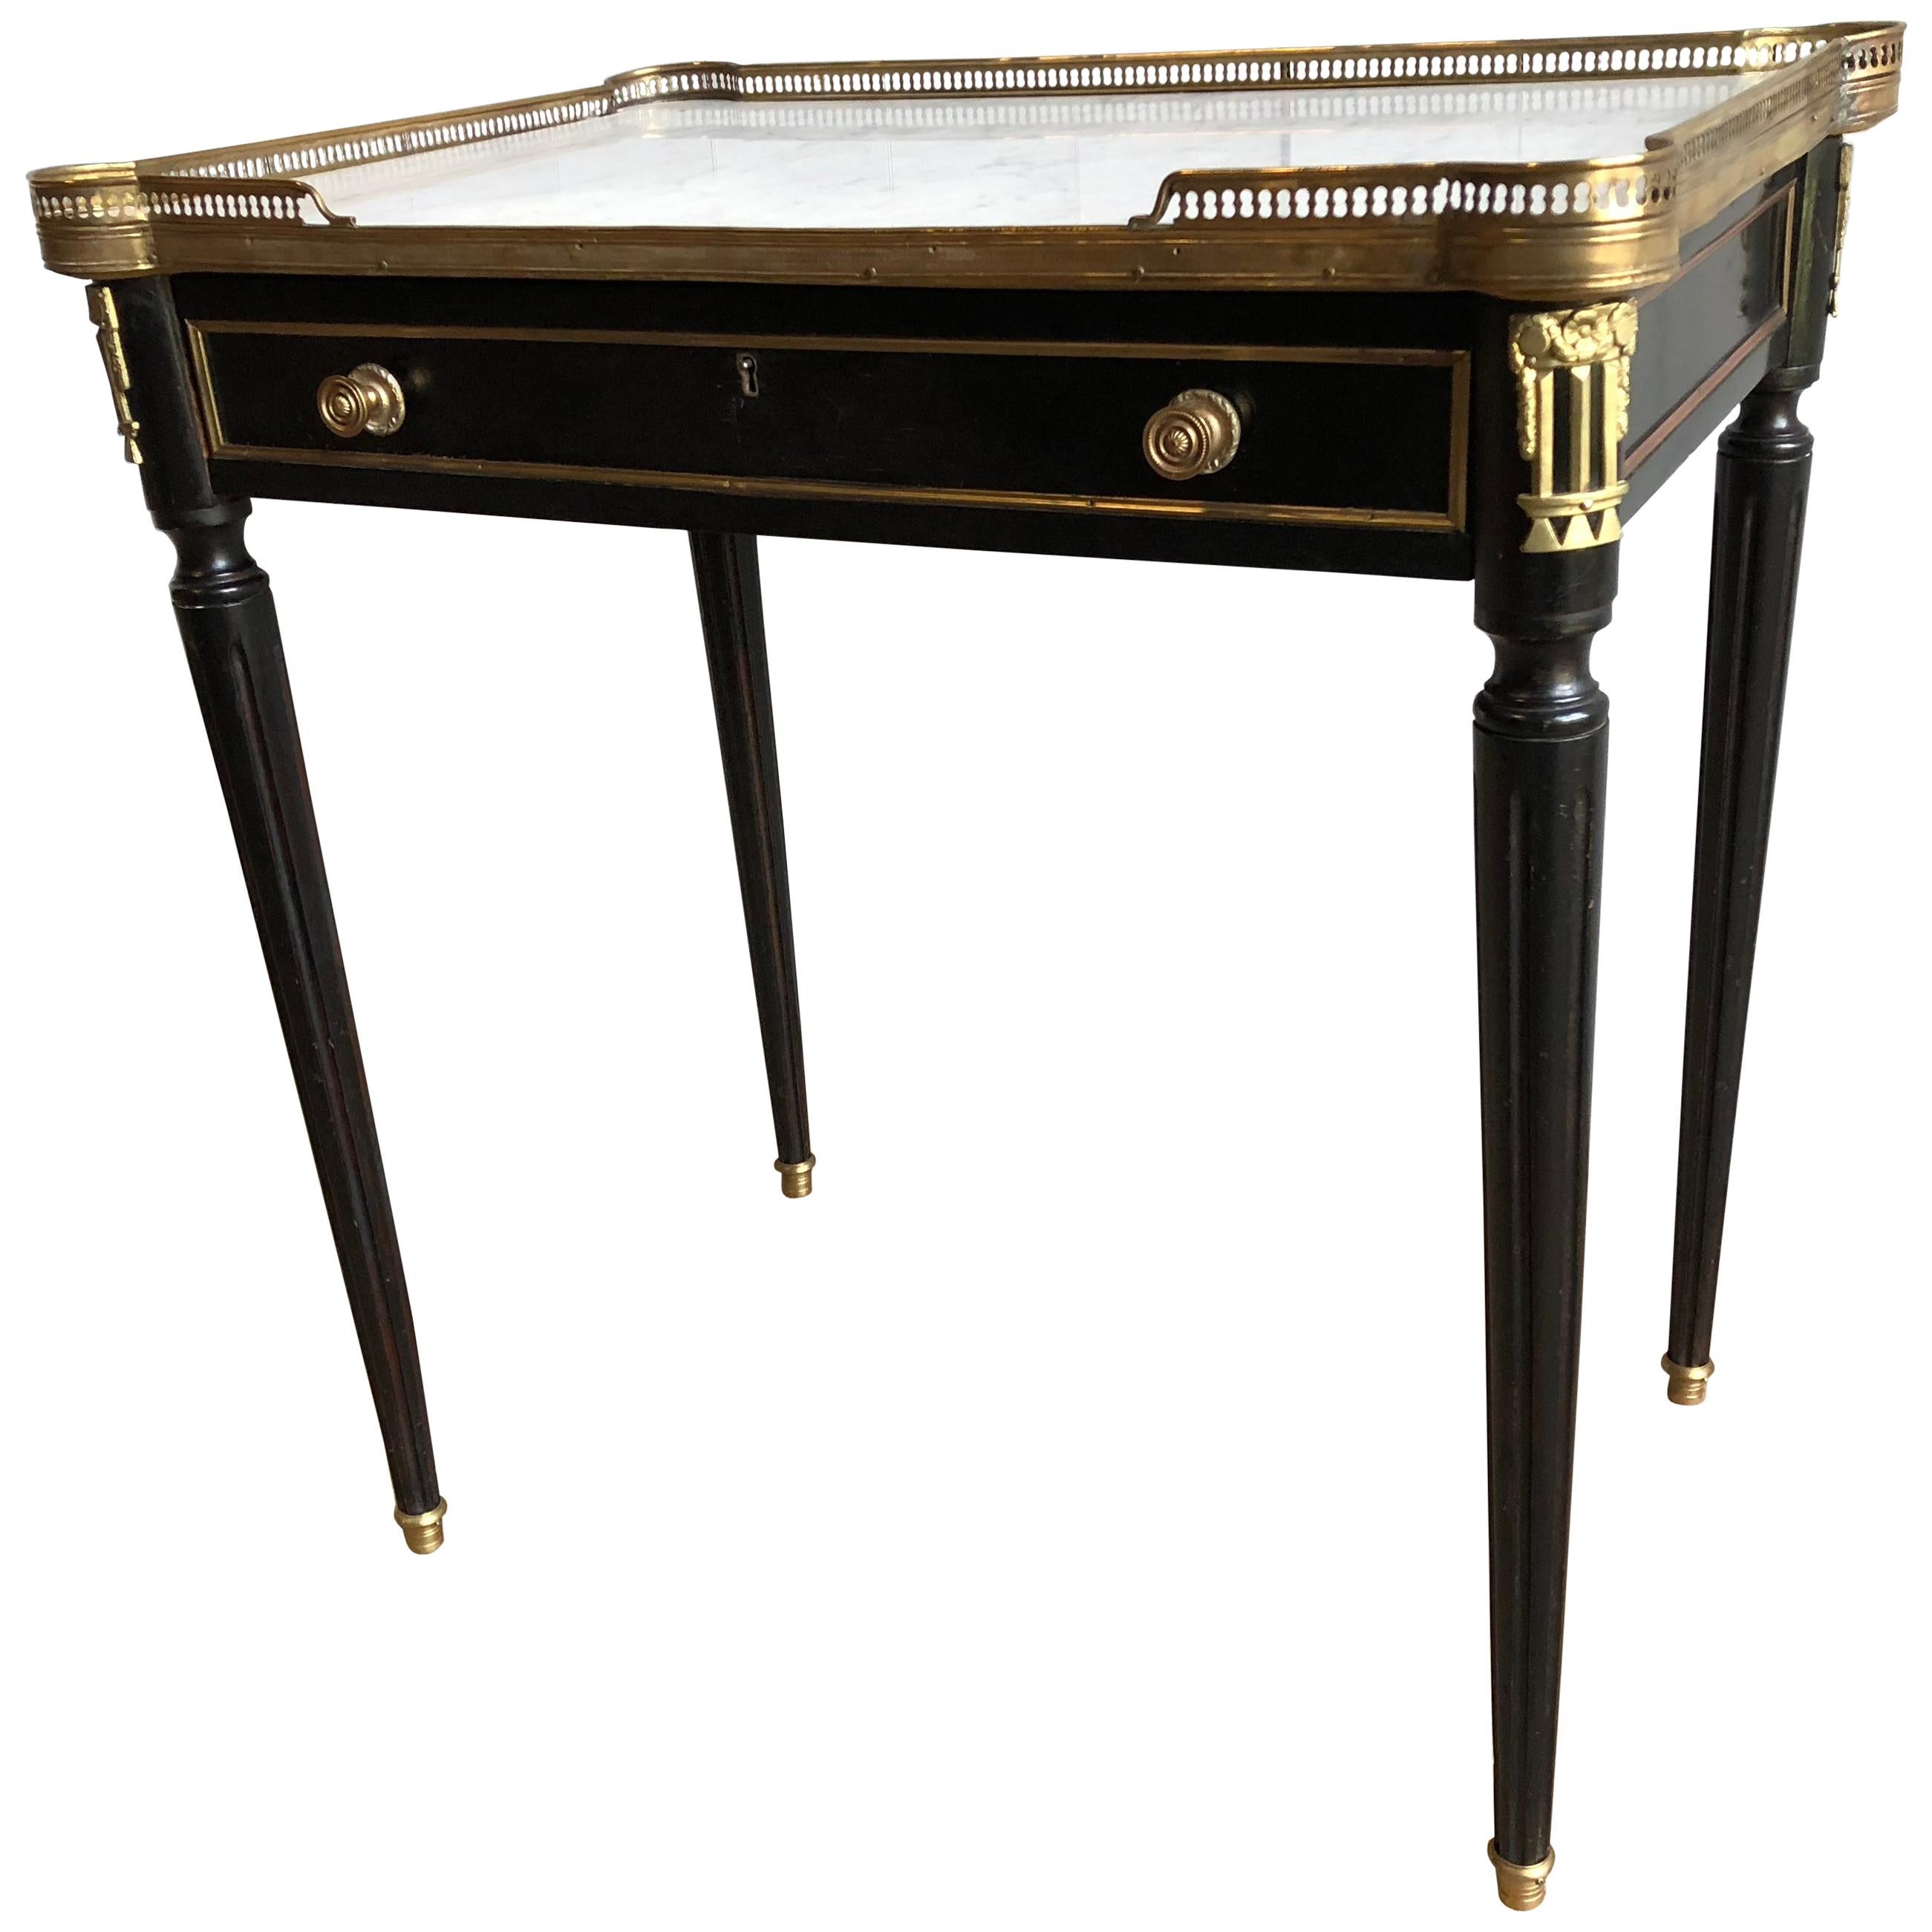 Directoire Style Writing Table, 1940s, Attributed to Jansen